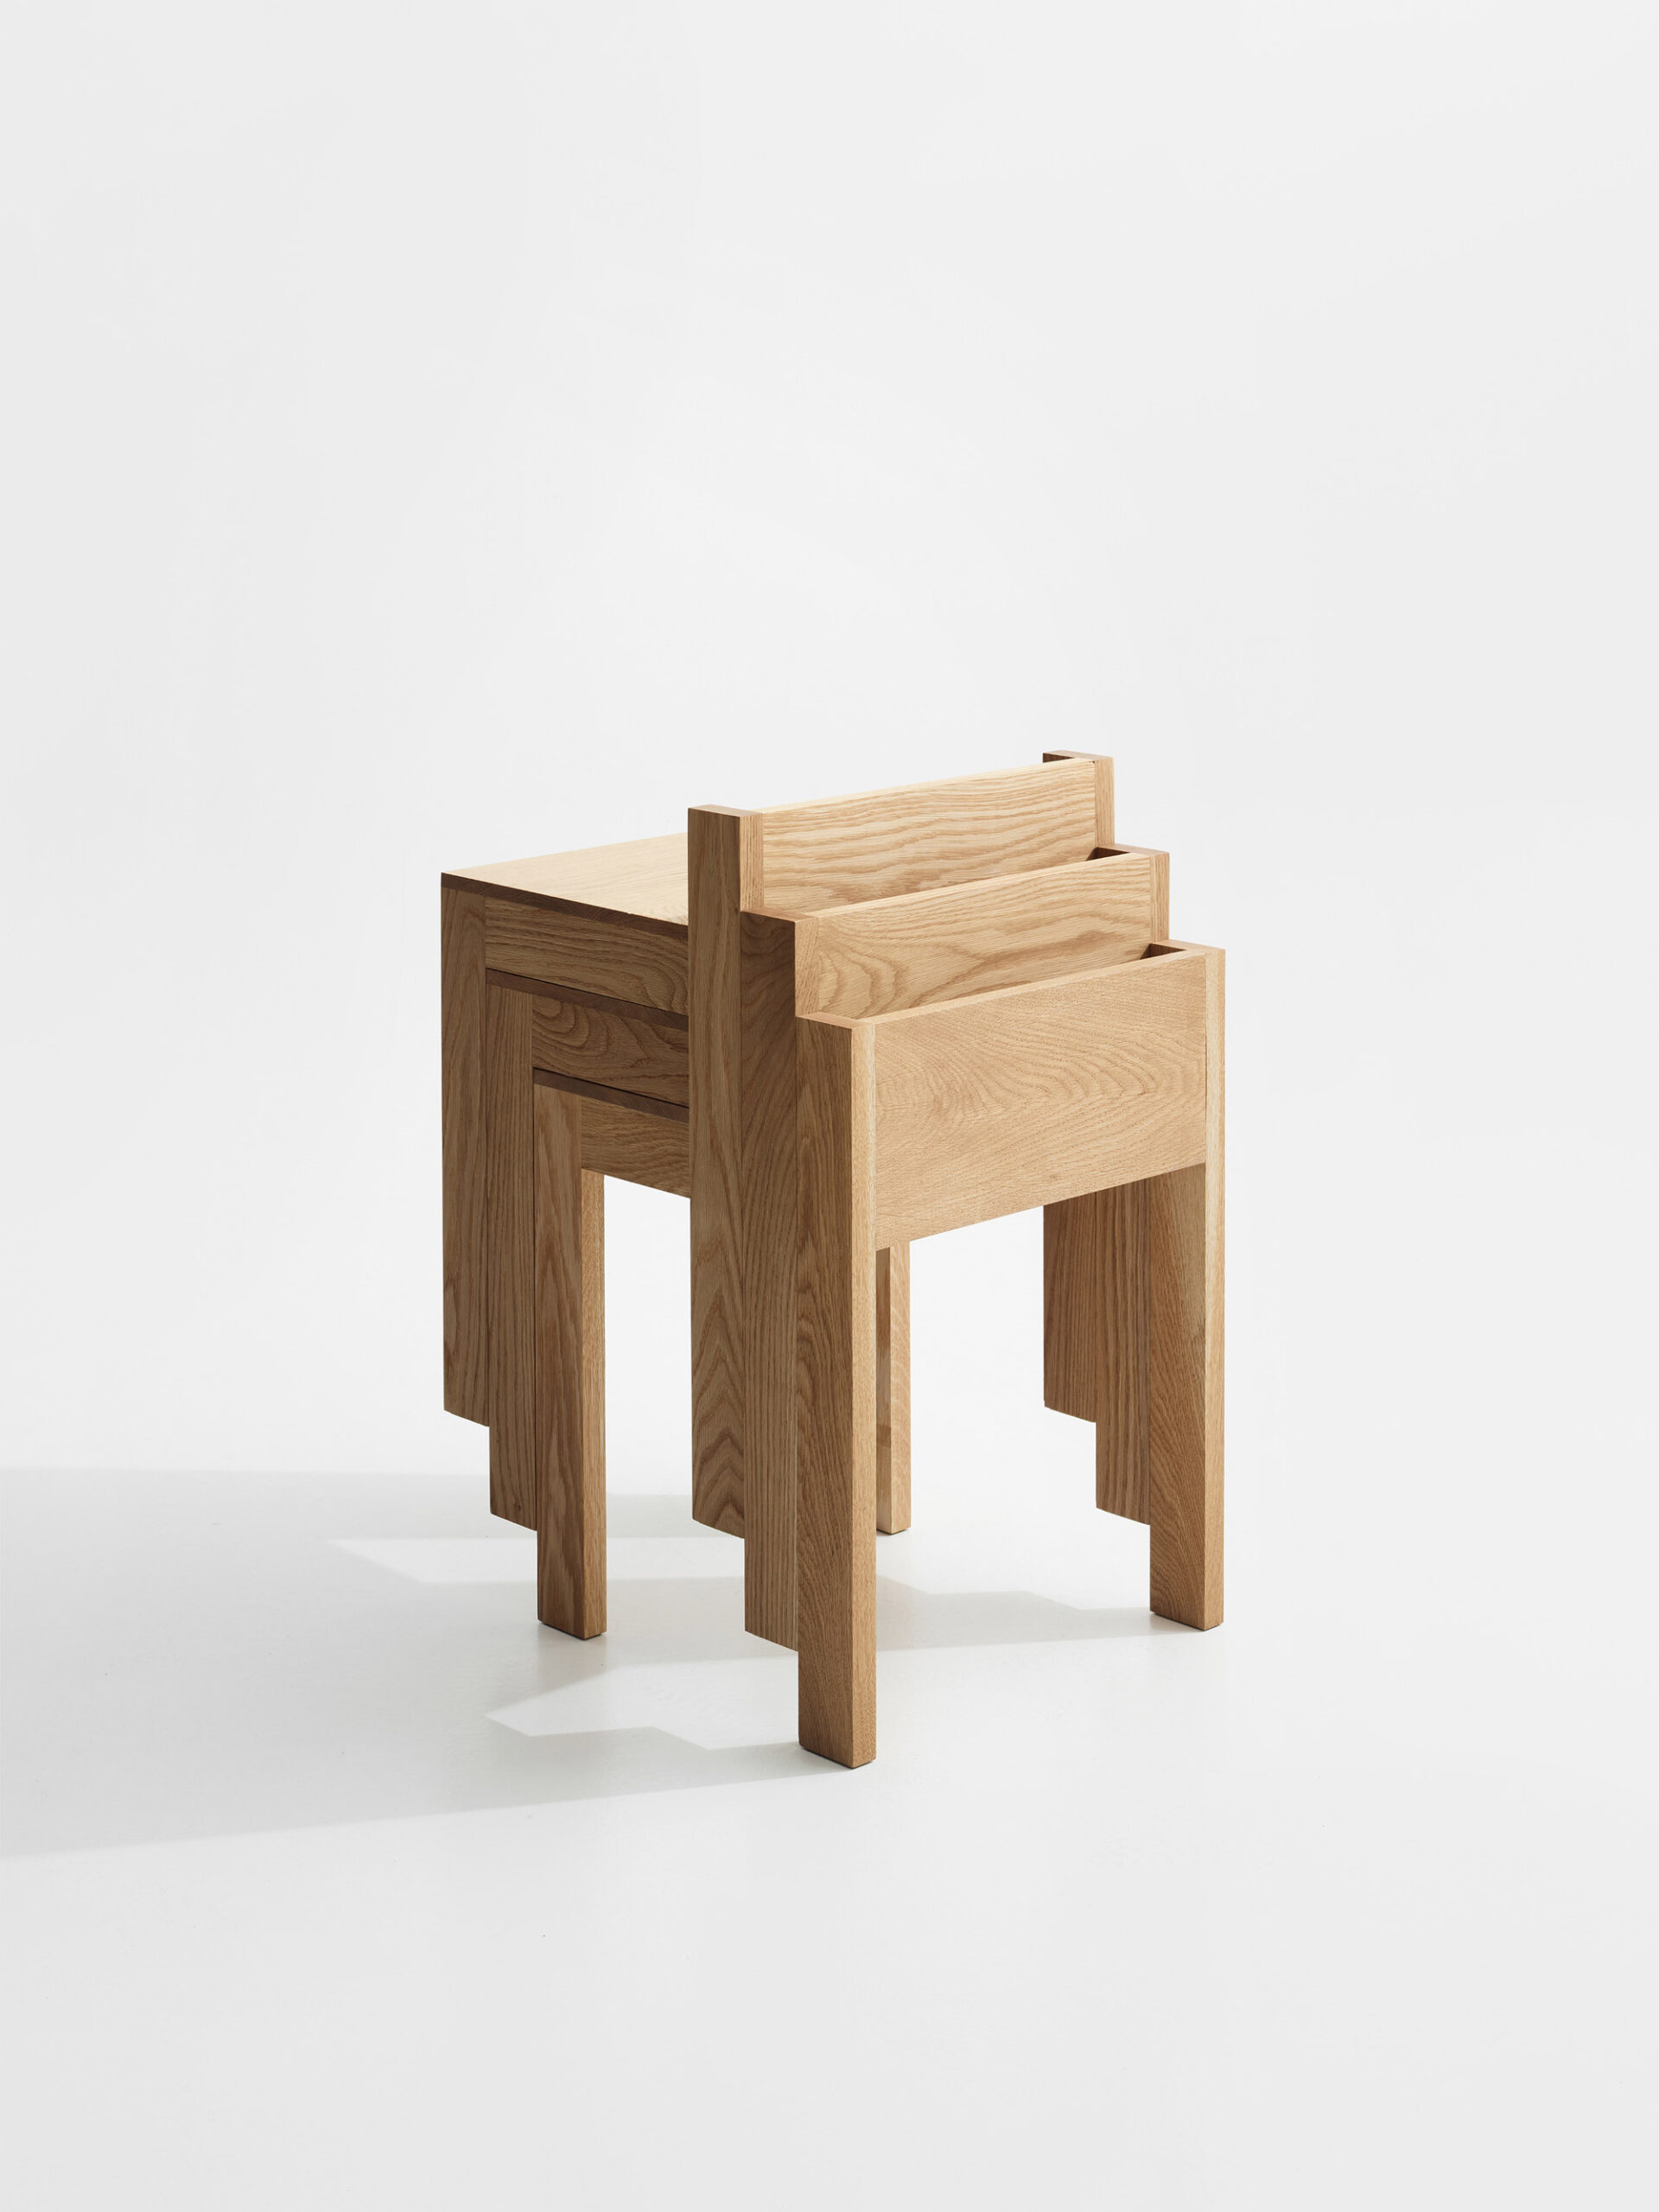 Stacked Minimalist Chair by Shin Youngjin